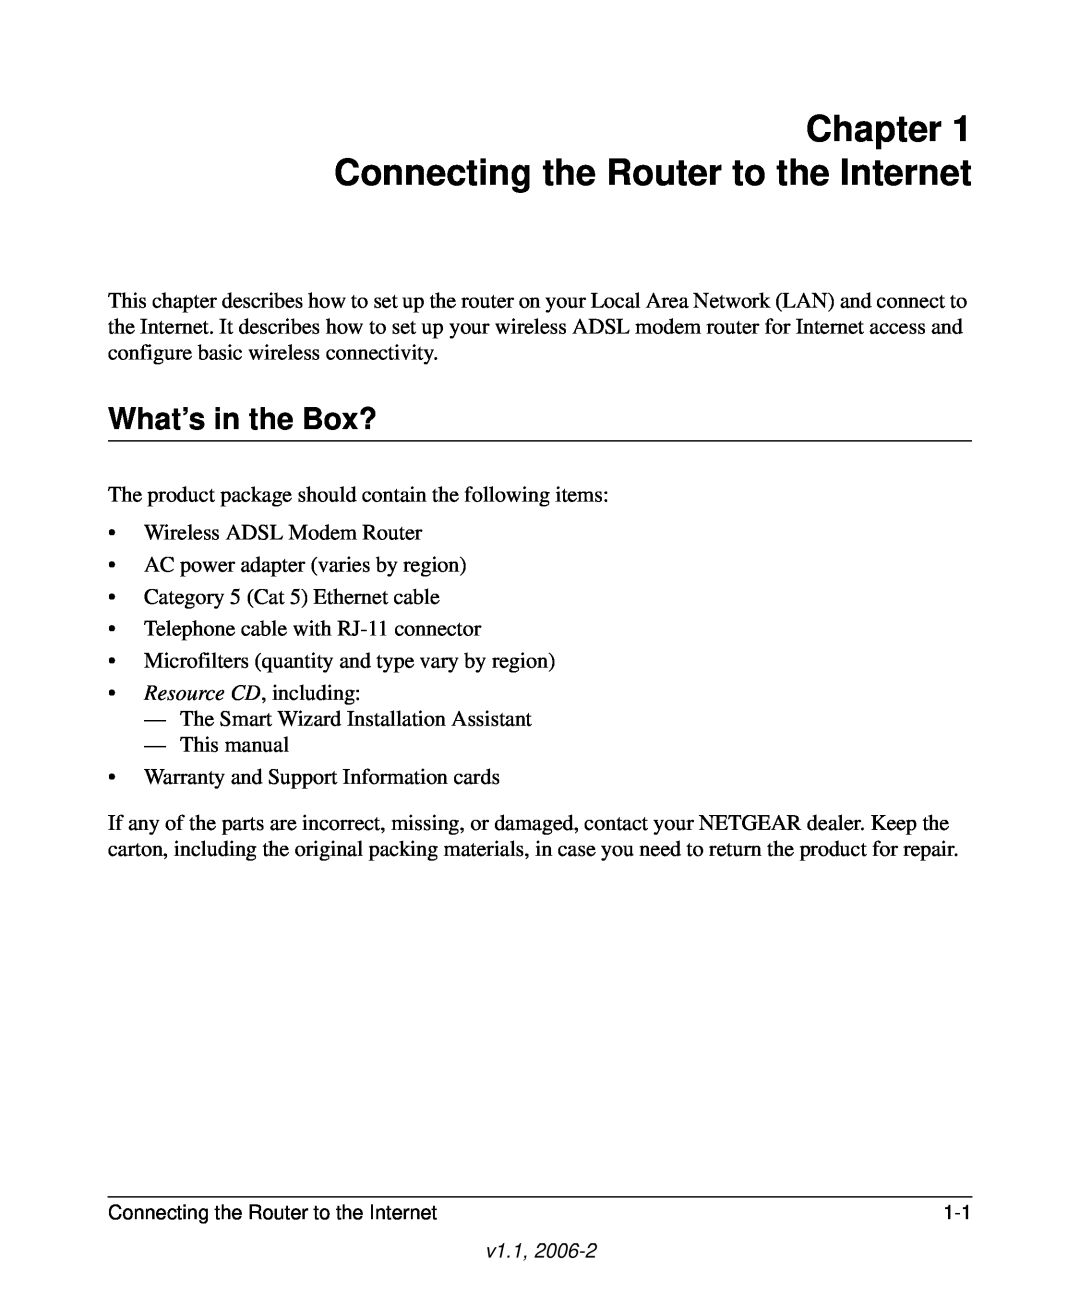 NETGEAR Wireless ADSL Modem Router manual Chapter Connecting the Router to the Internet, What’s in the Box? 